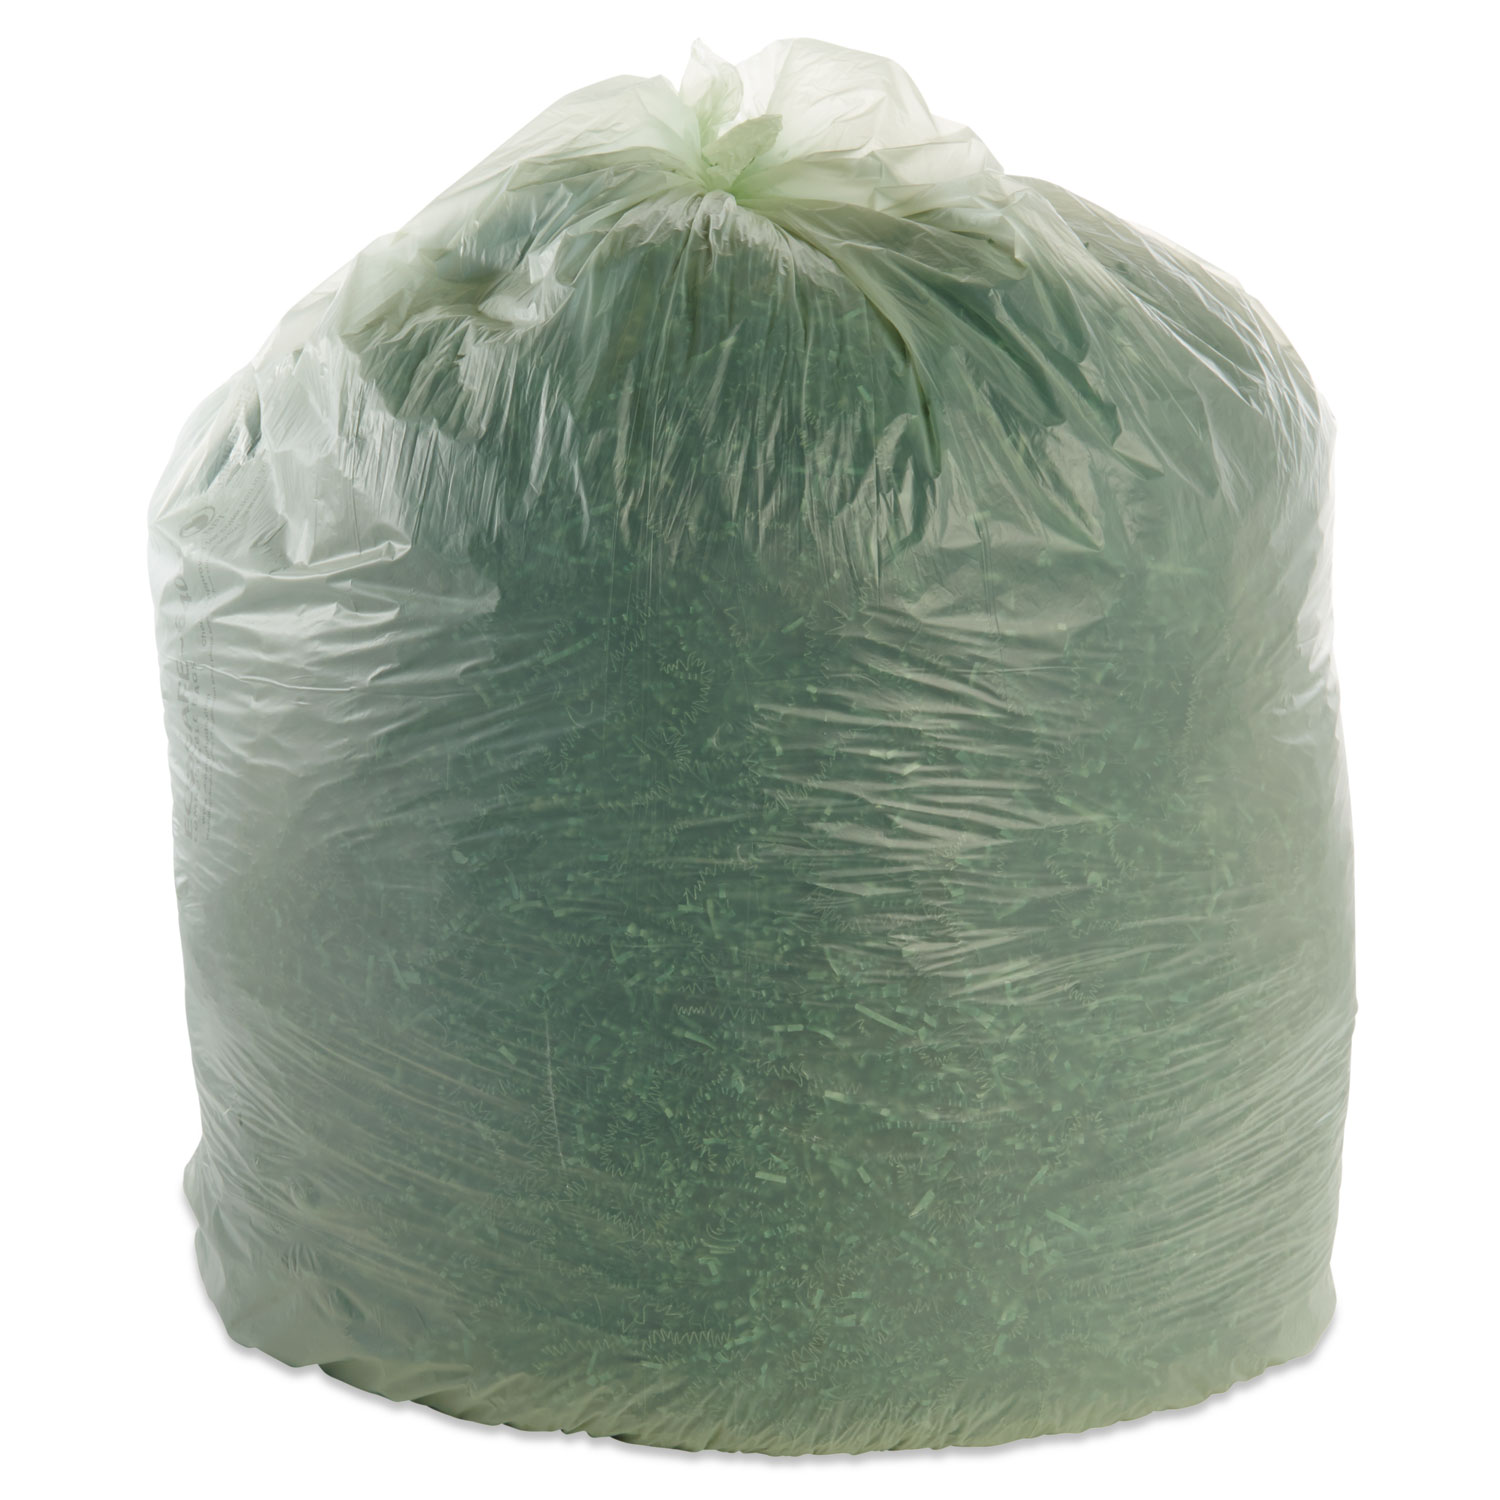 EcoSAfe-6400 Compostable Compost Bags, .85mil, 48 x 60, Green, 30/Box